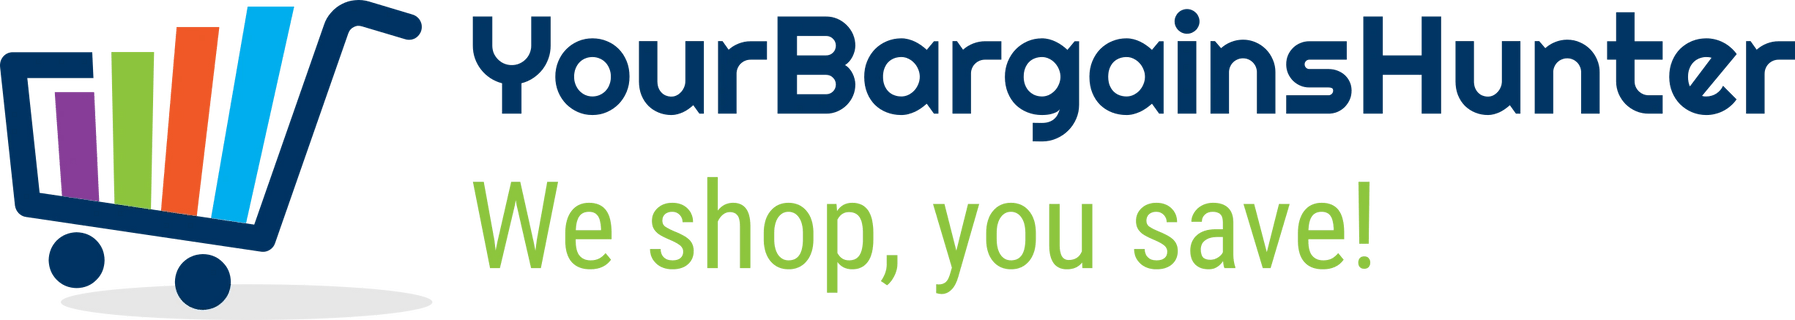  YOURBARGAINSHUNTER

We hunt, you save time and money!